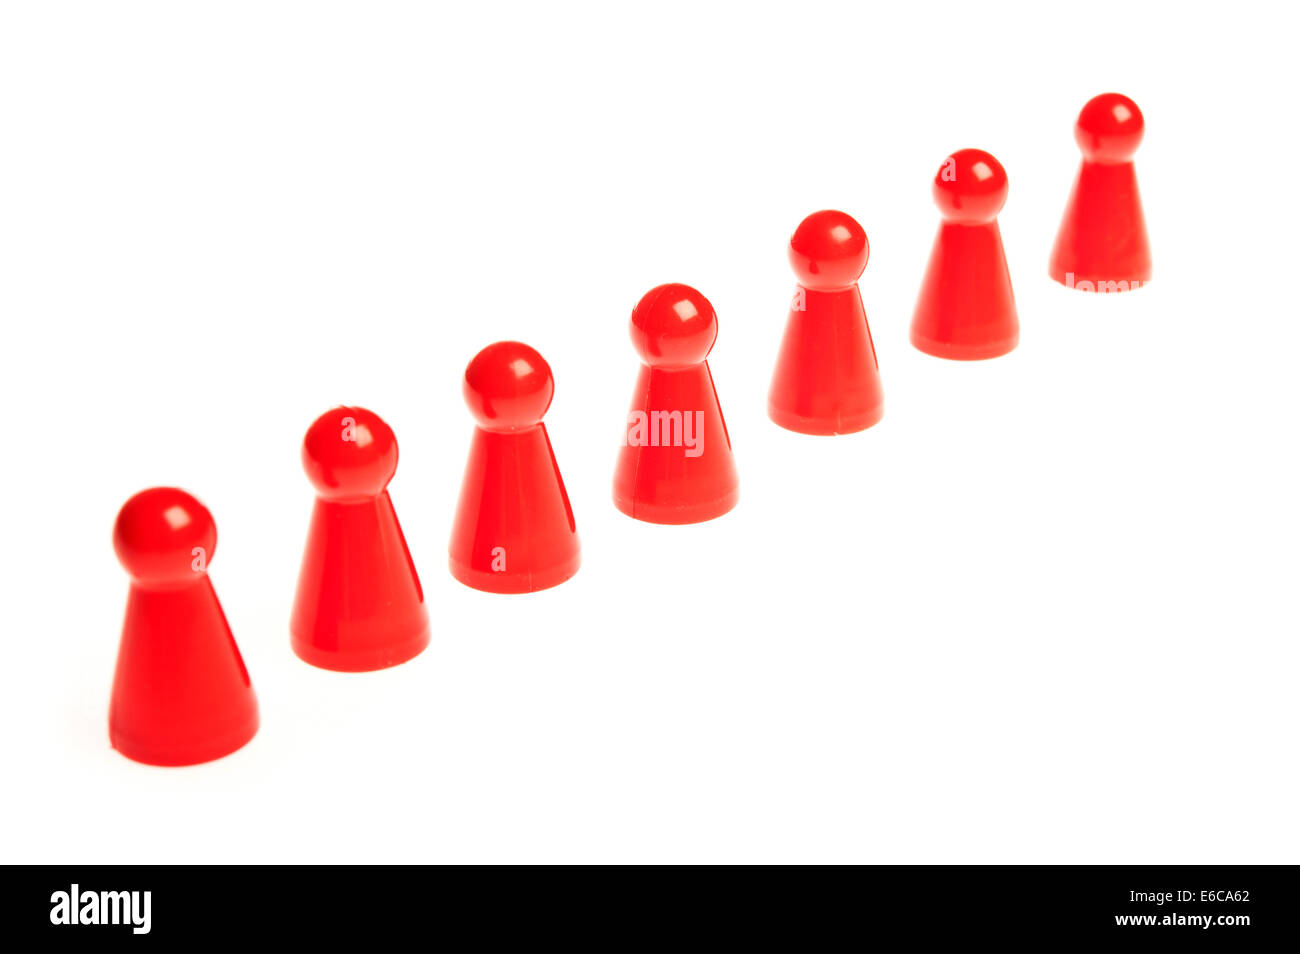 row of seven red counters, teamwork concept Stock Photo